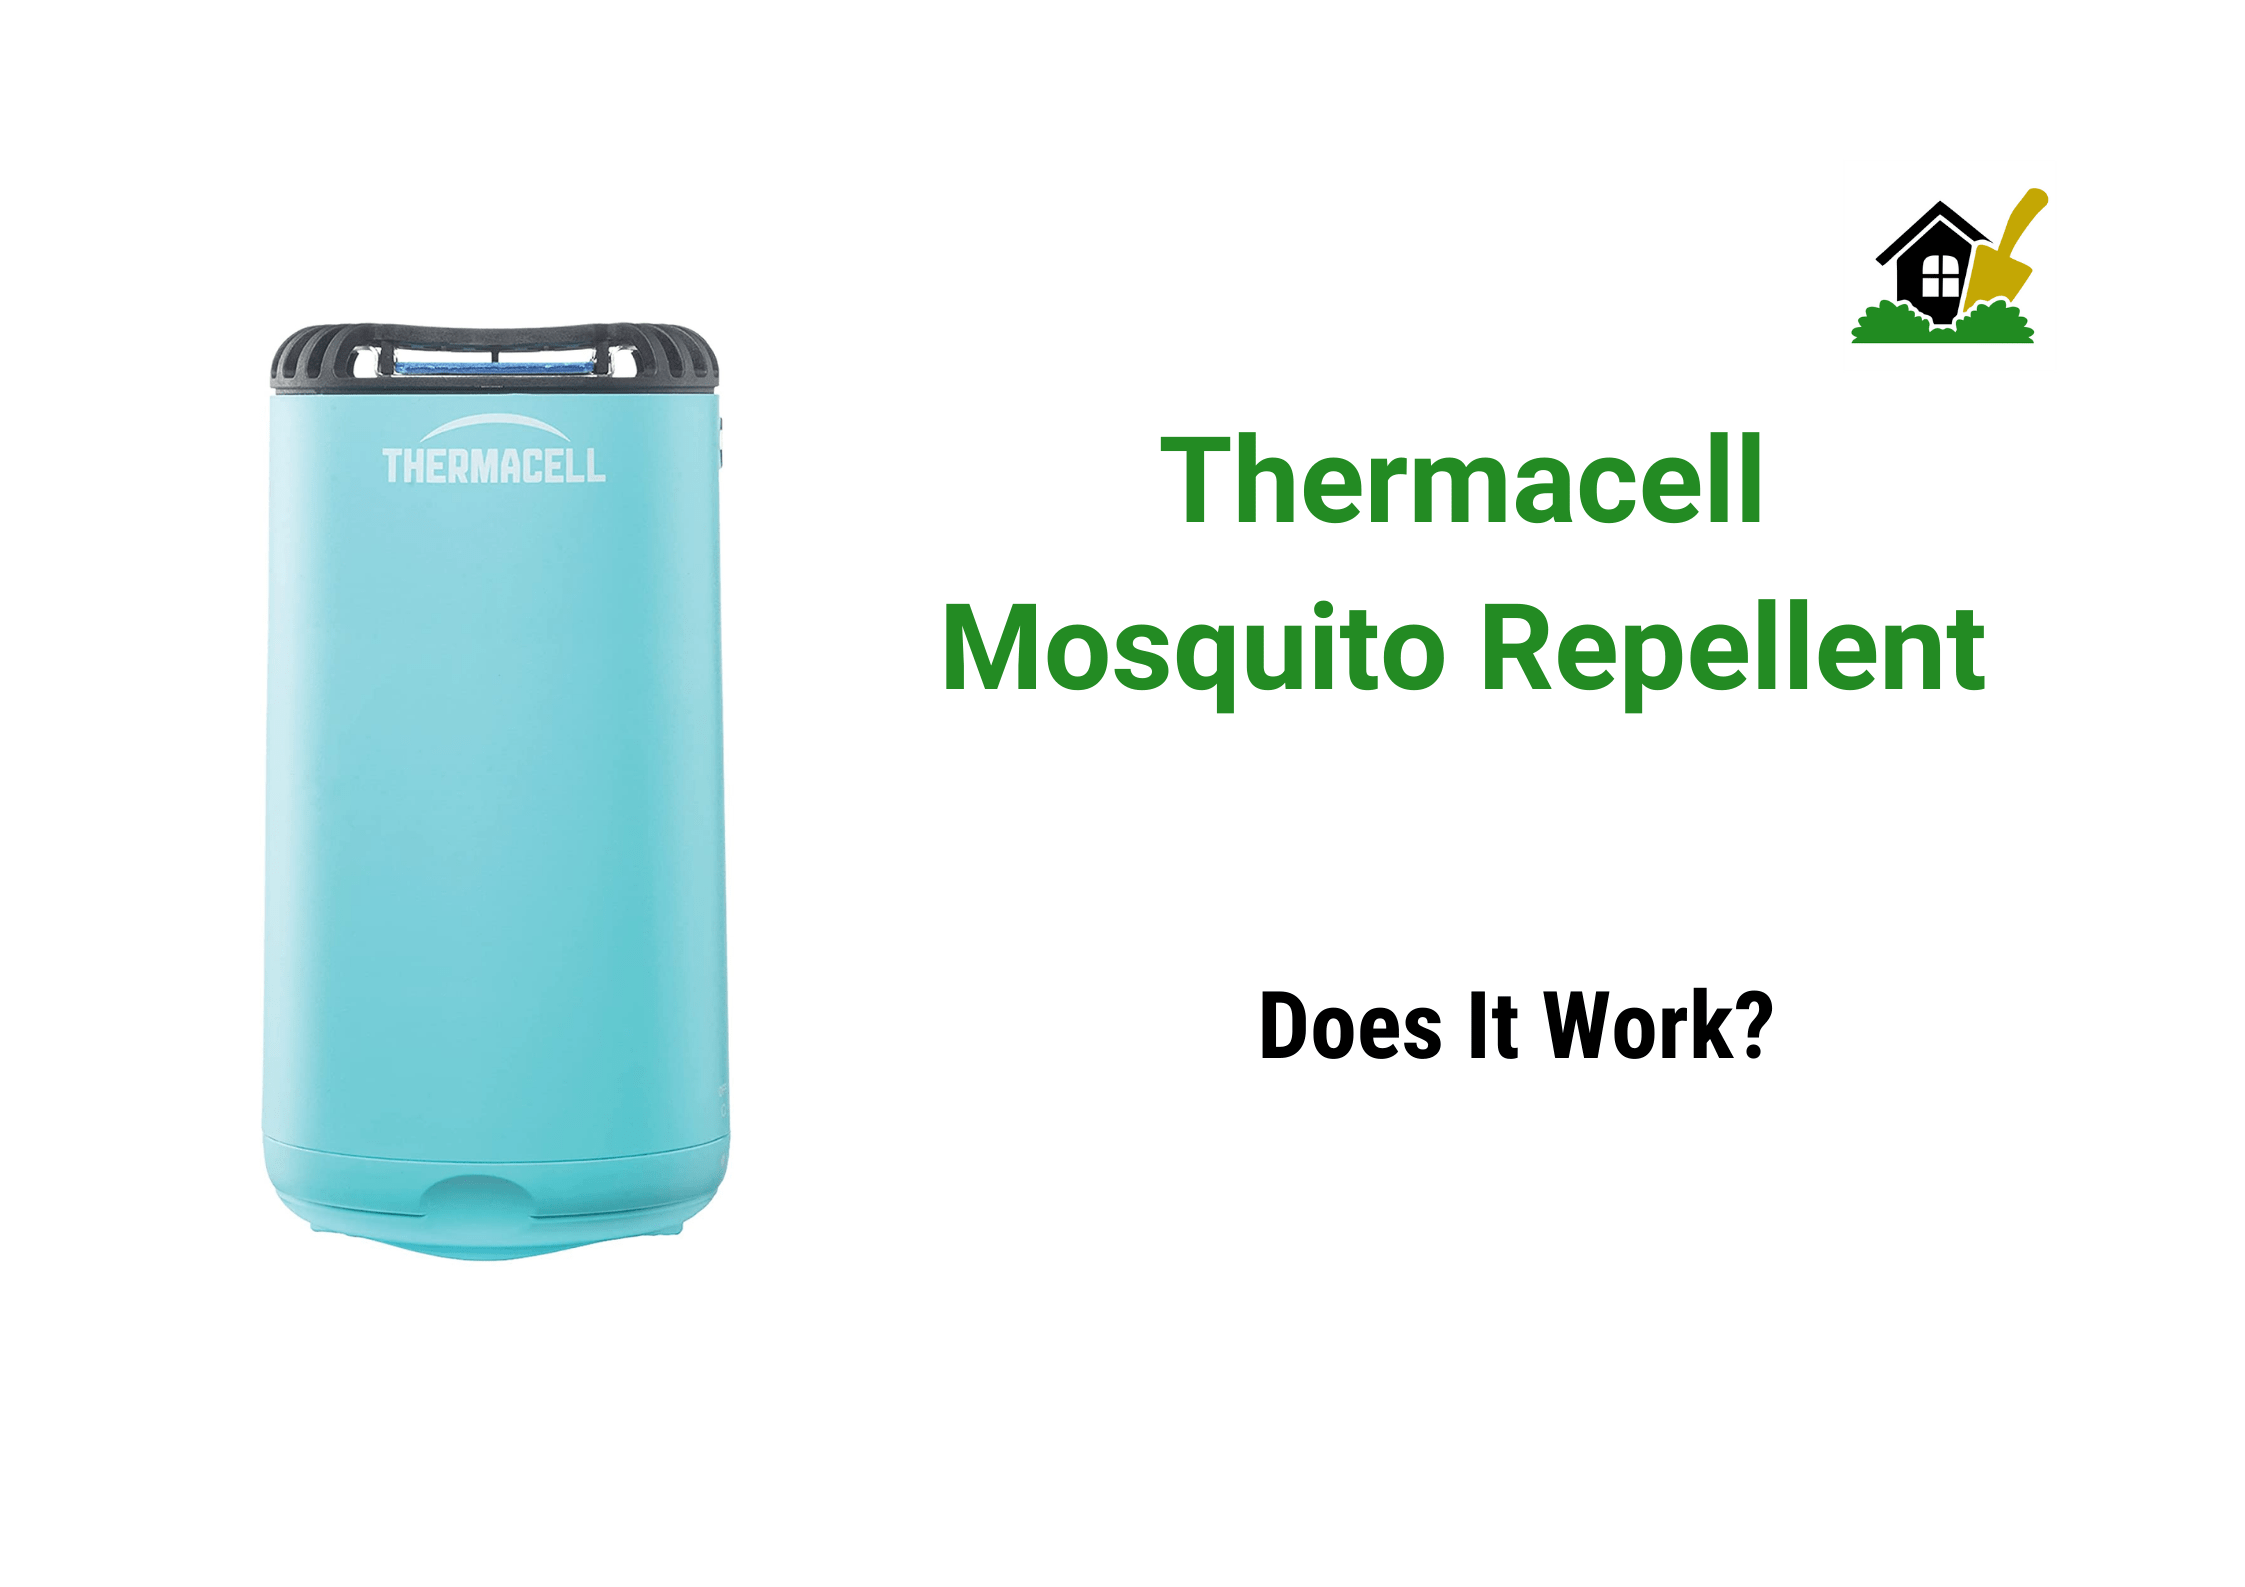 Thermacell Mosquito Repellent Reviews